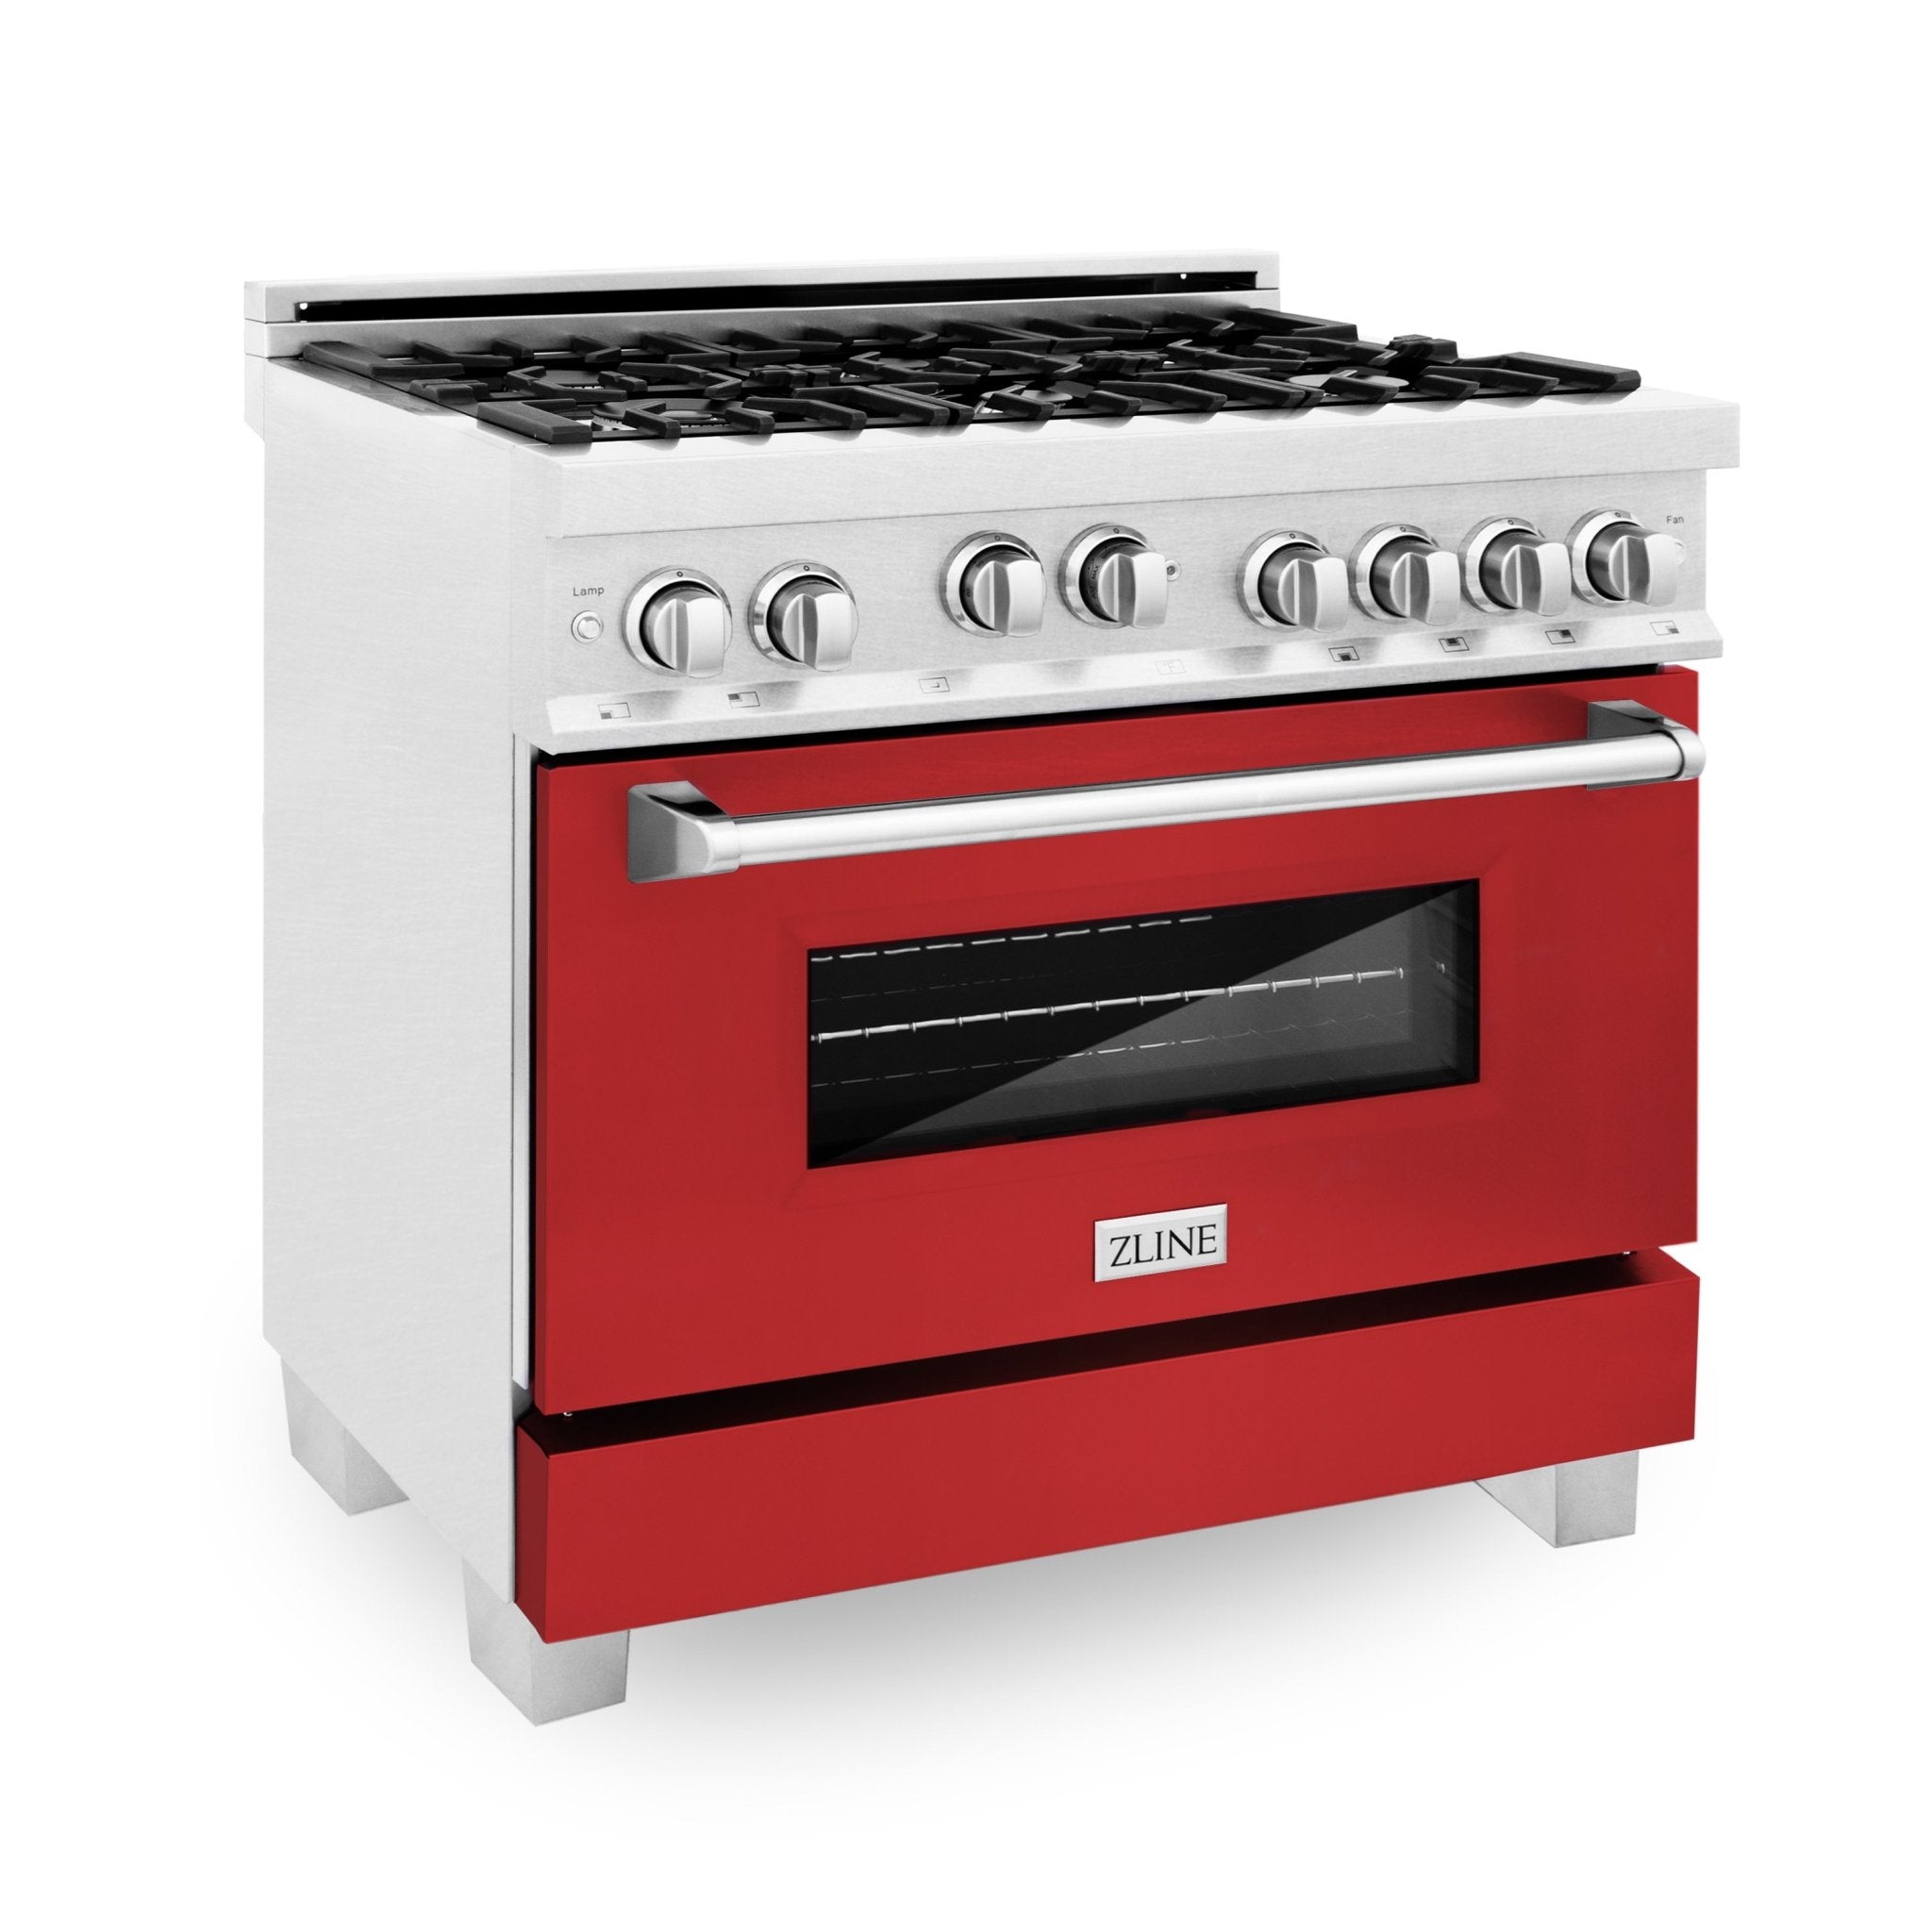 ZLINE Kitchen and Bath, ZLINE 36" Professional 4.6 cu. ft. 4 Gas on Gas Range in DuraSnow® Stainless Steel with Color Door Options, RGS-RM-36,